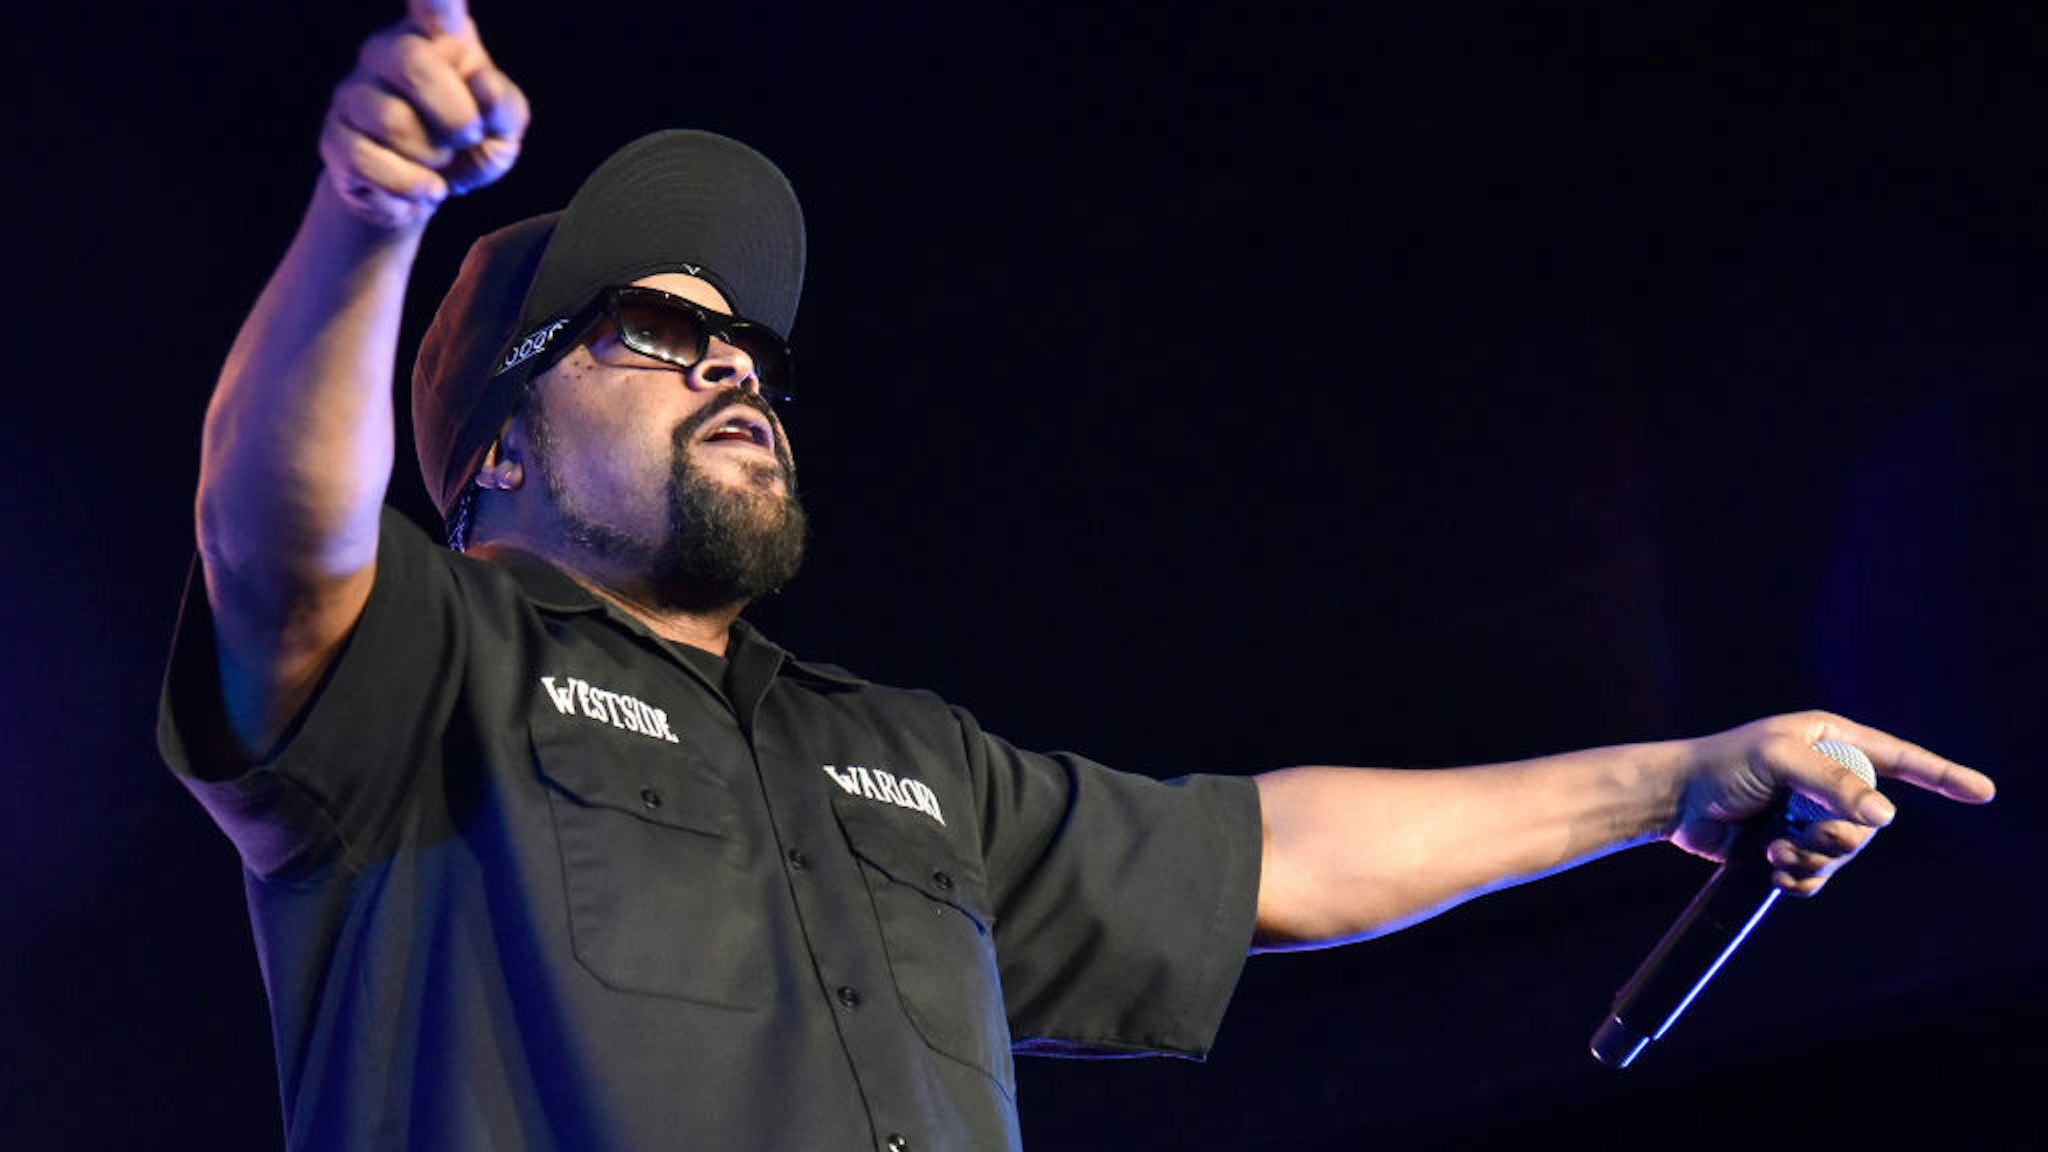 Ice Cube performs during the "How the West was Won" tour at Toyota Amphitheatre on October 12, 2019 in Wheatland, California.